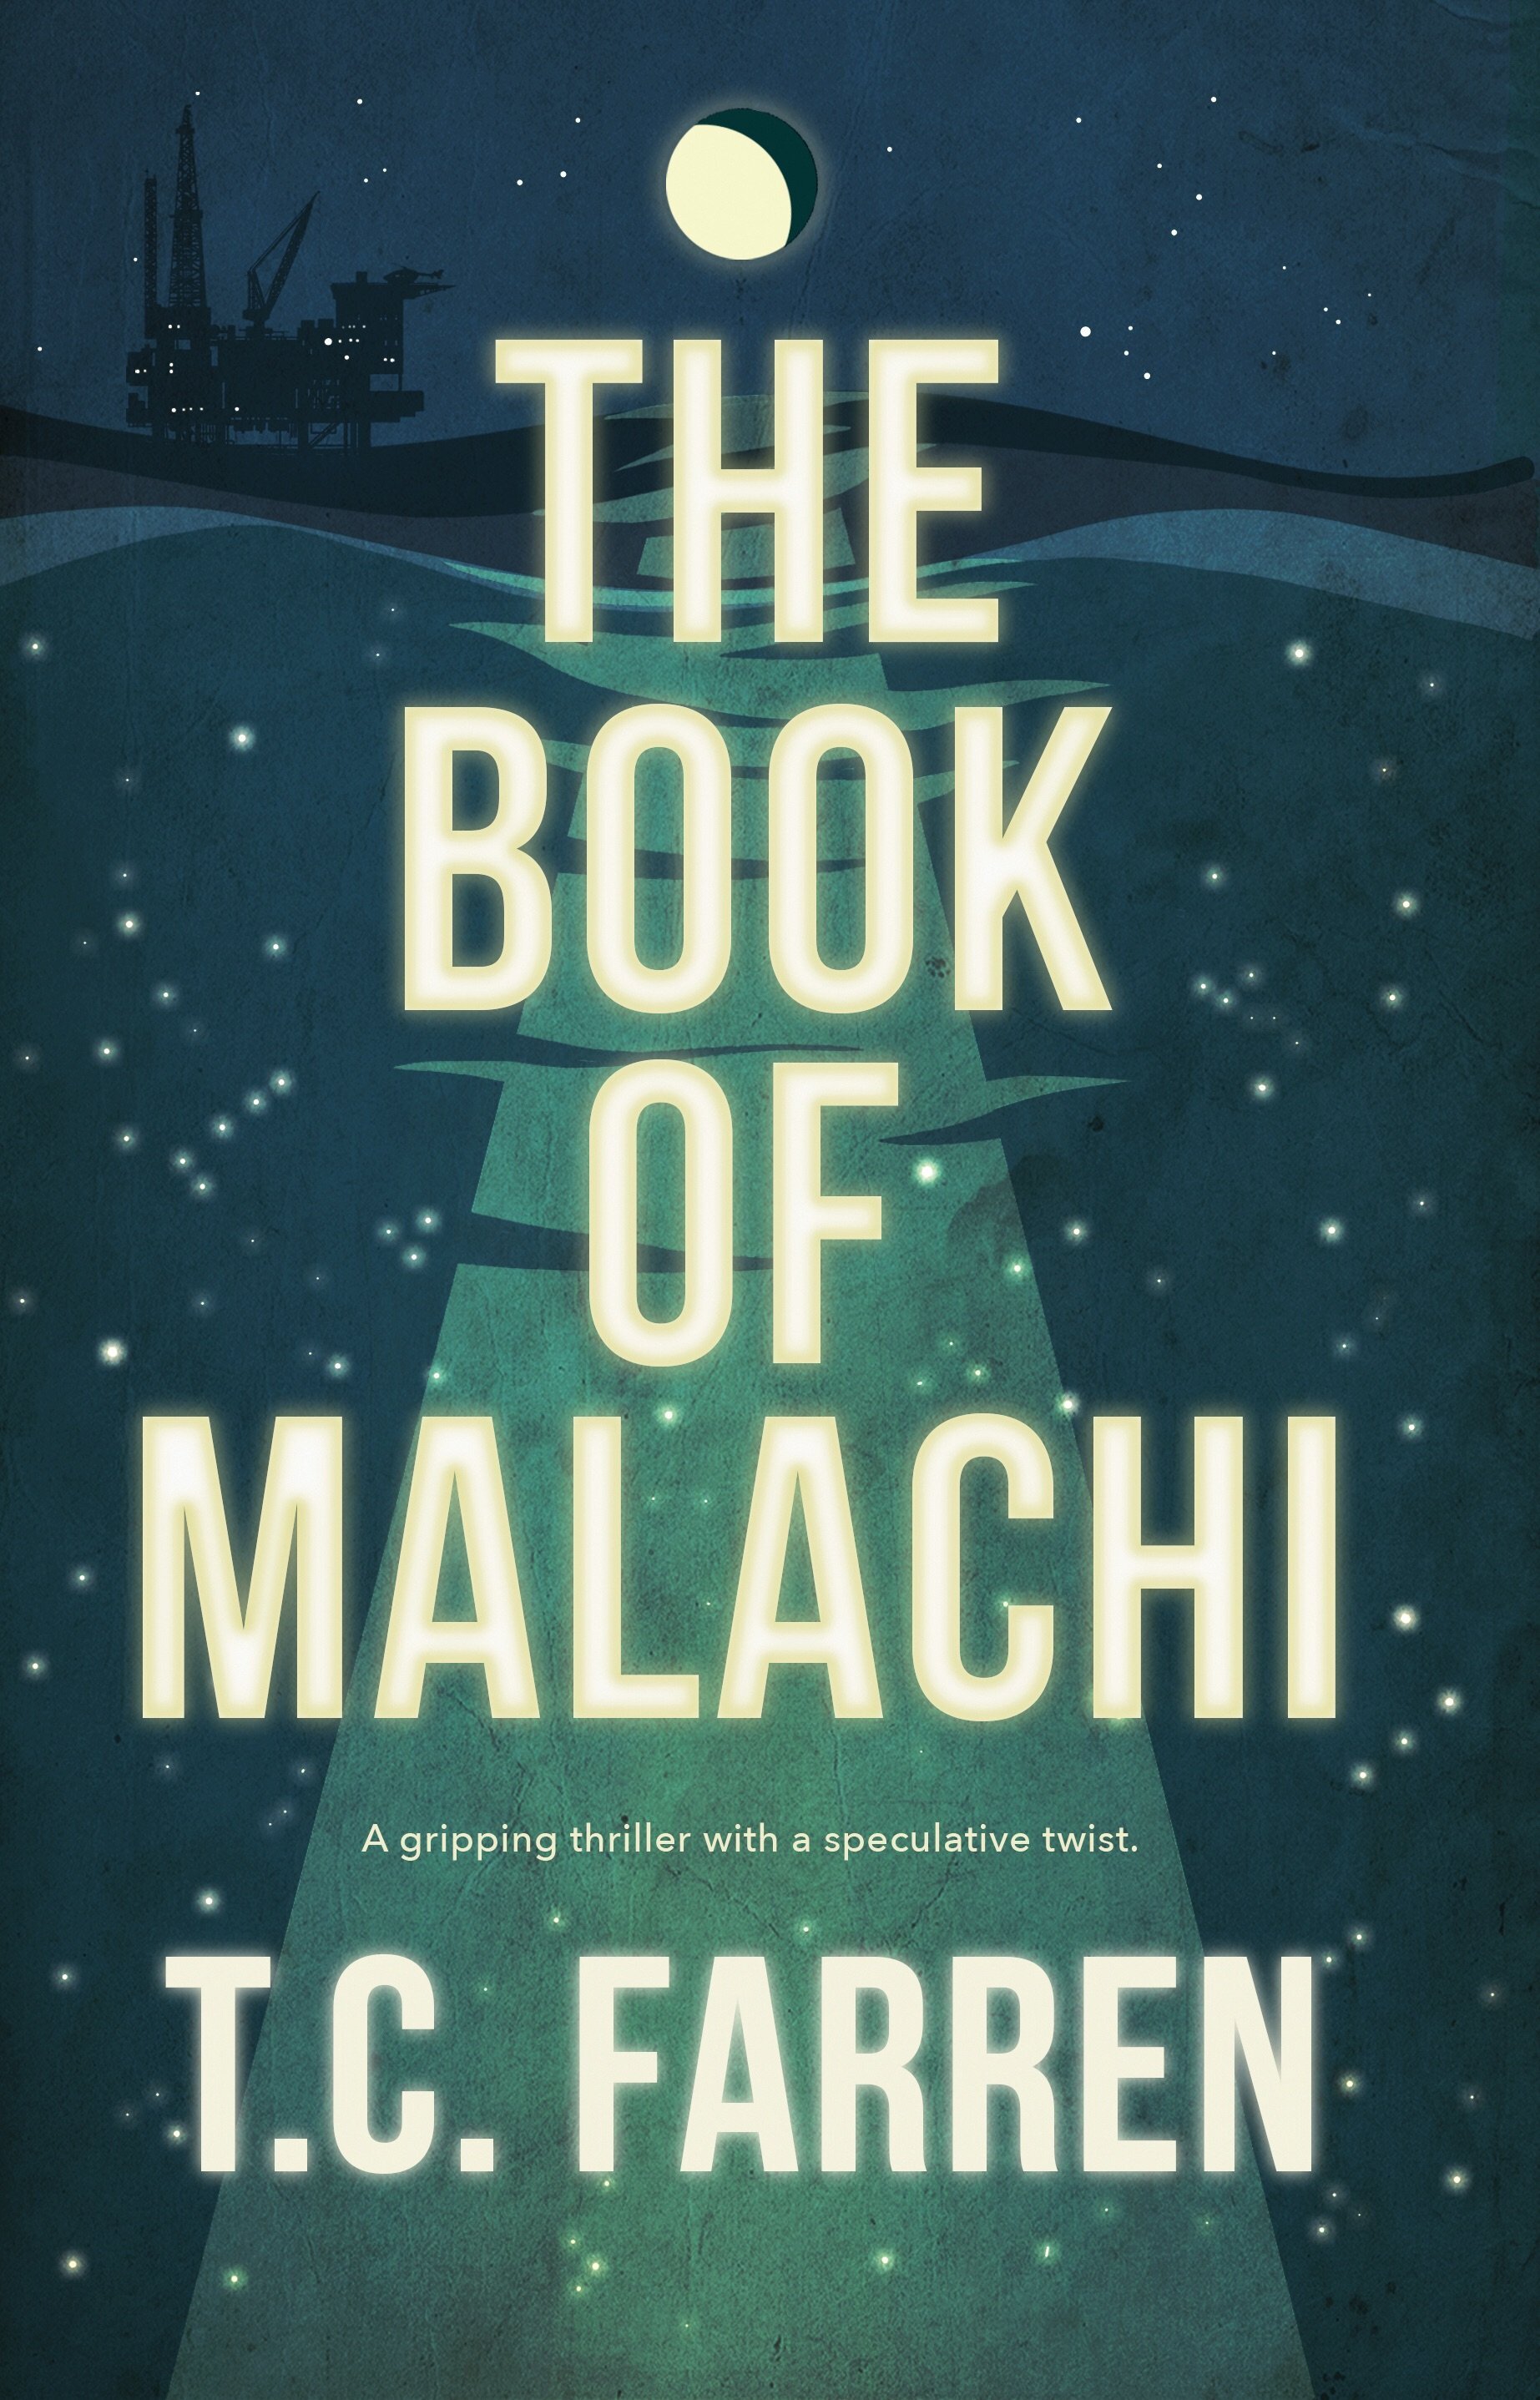 THE BOOK OF MALACHI by T C Farren Kwela cover.jpg